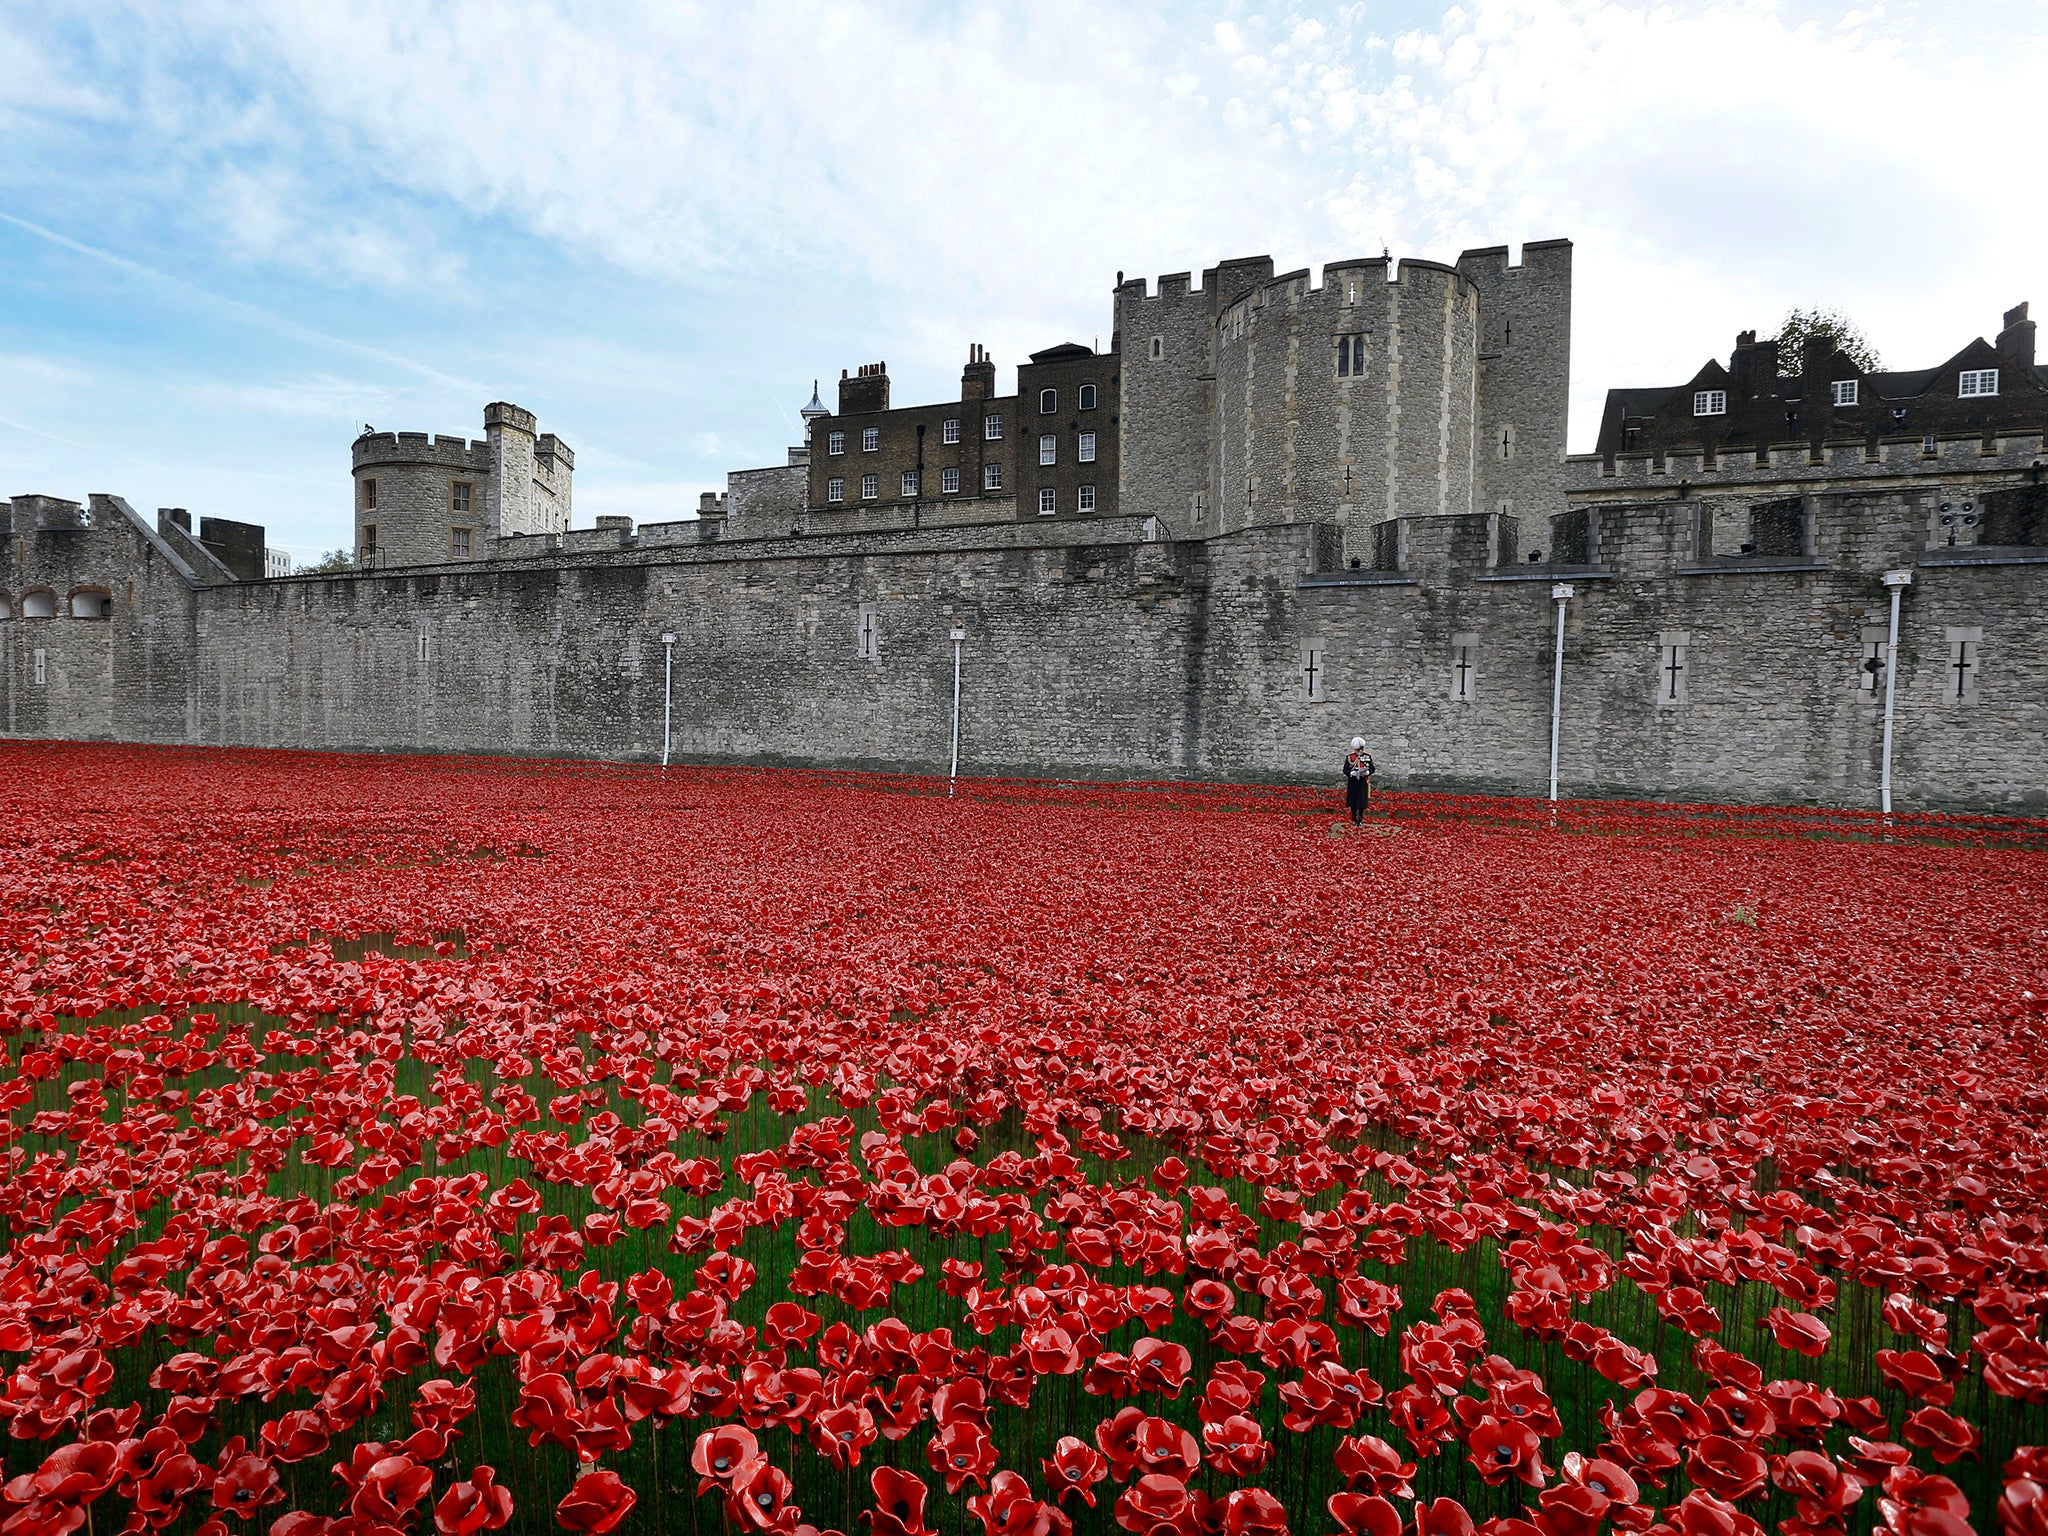 Remembrance Sunday Quotes